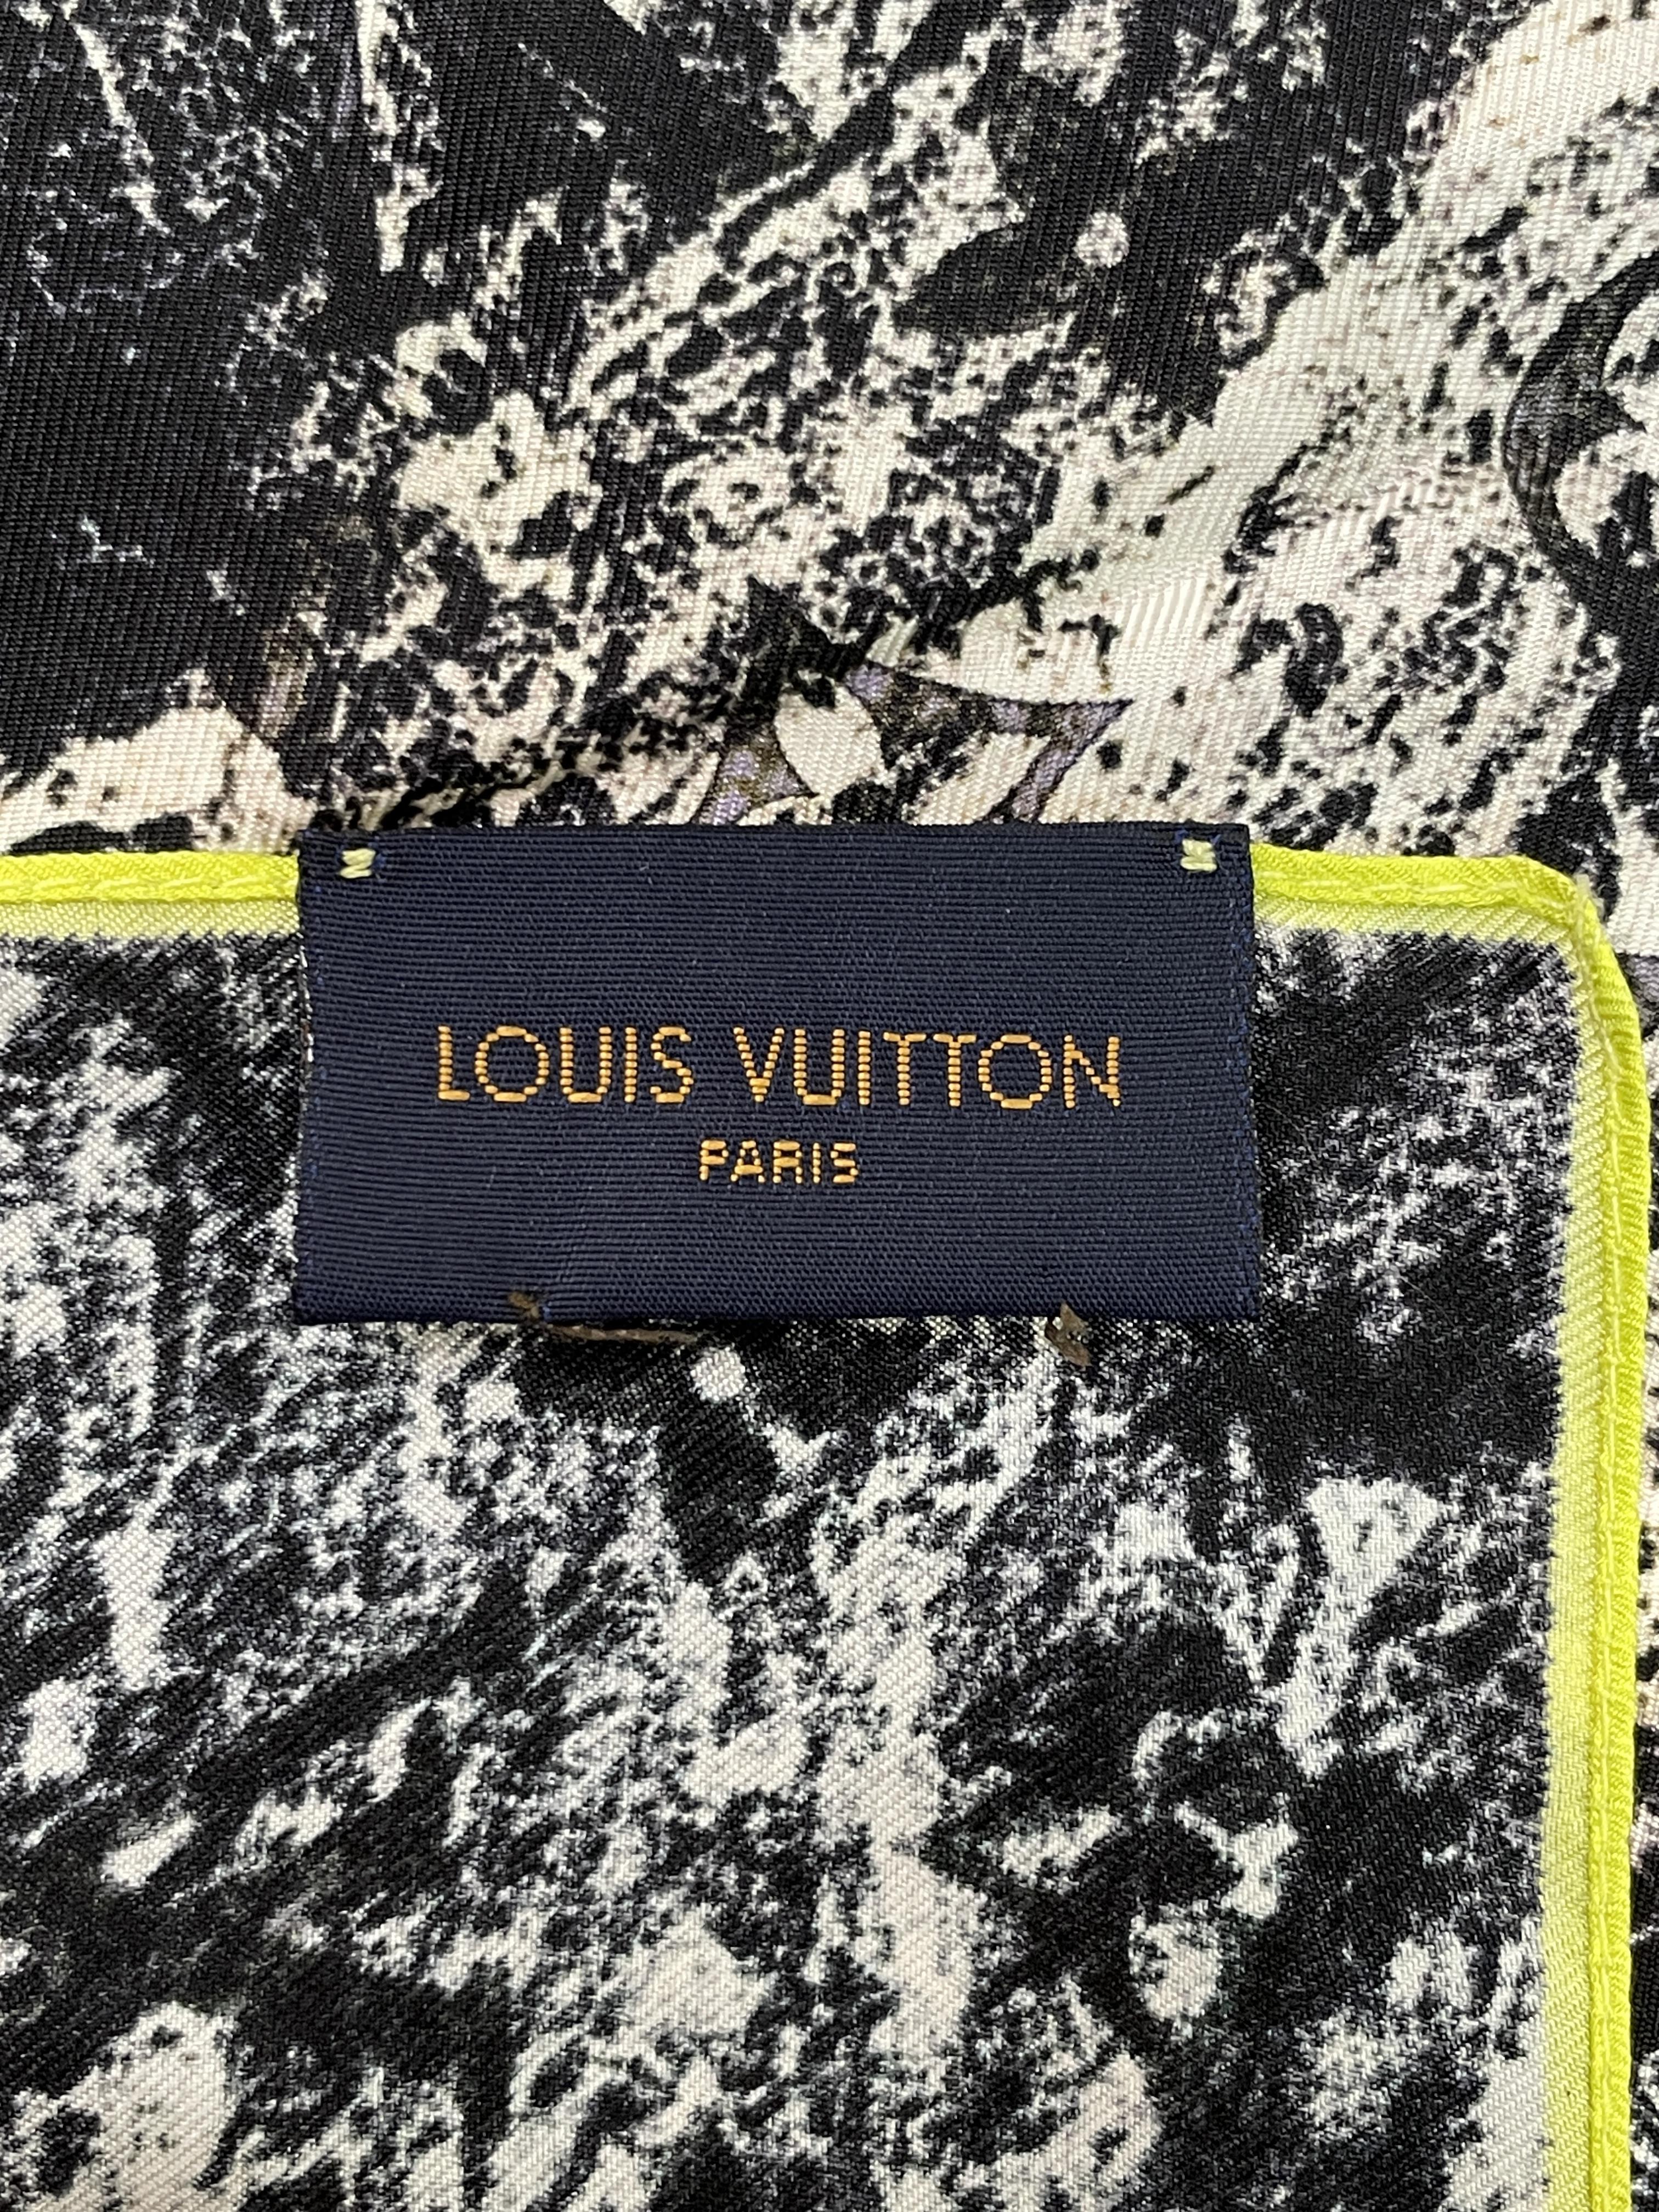 AN ASSORTMENT OF LOUIS VUITTON SCARVES - Image 10 of 14